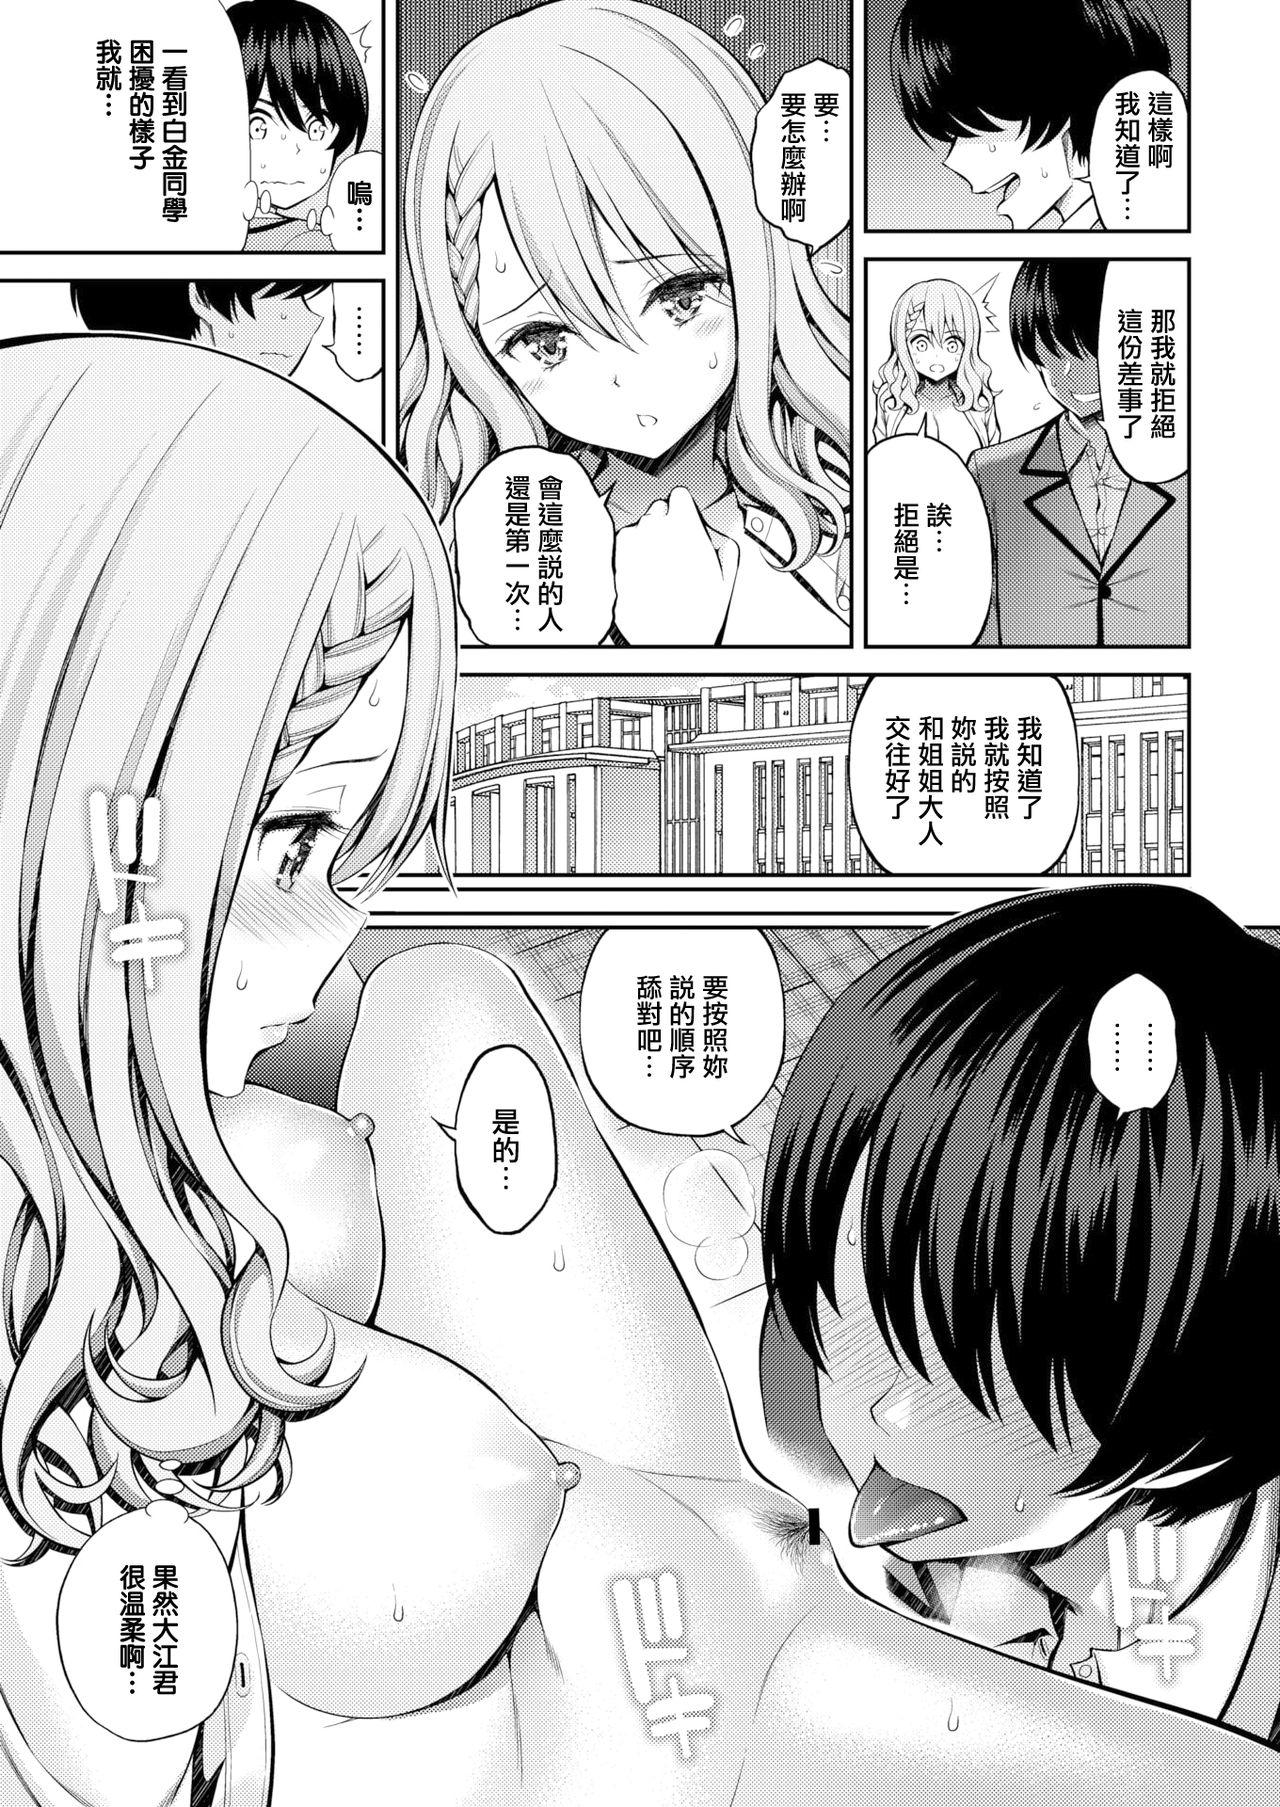 Show Sister X Lecture Shemales - Page 10